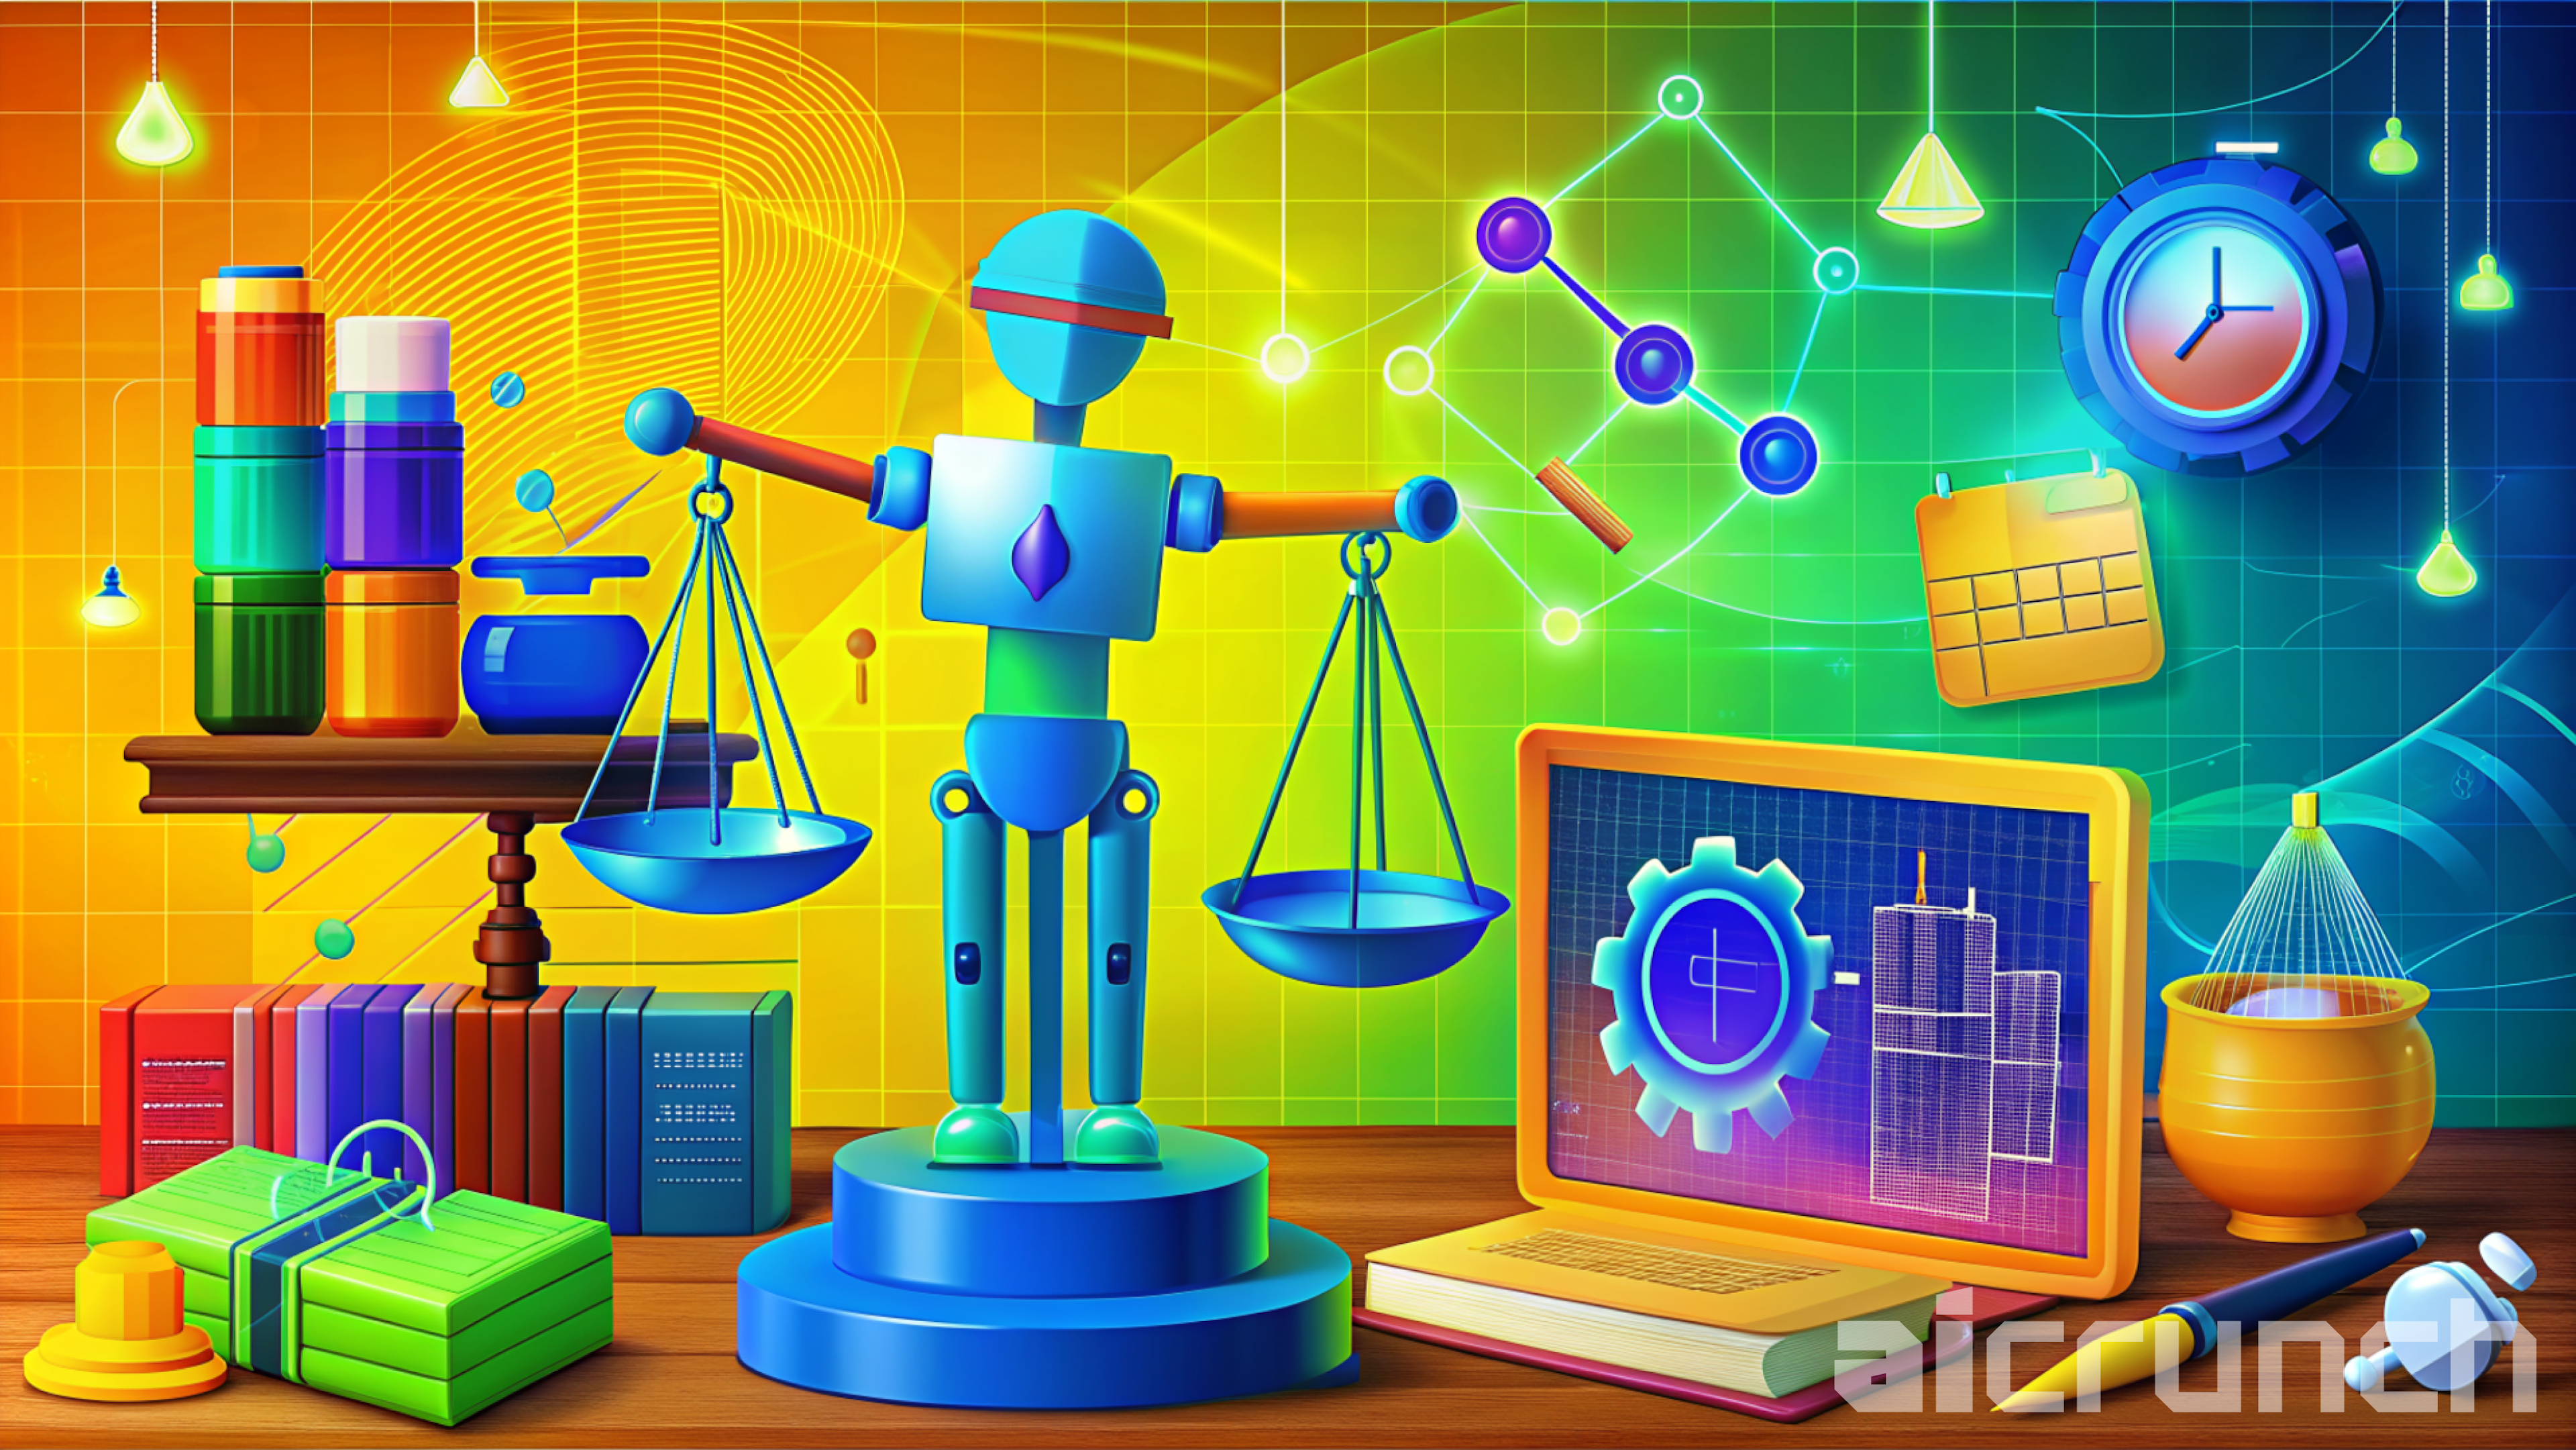 enhancing-legal-services-the-role-of-ai-legal-assistant-tools